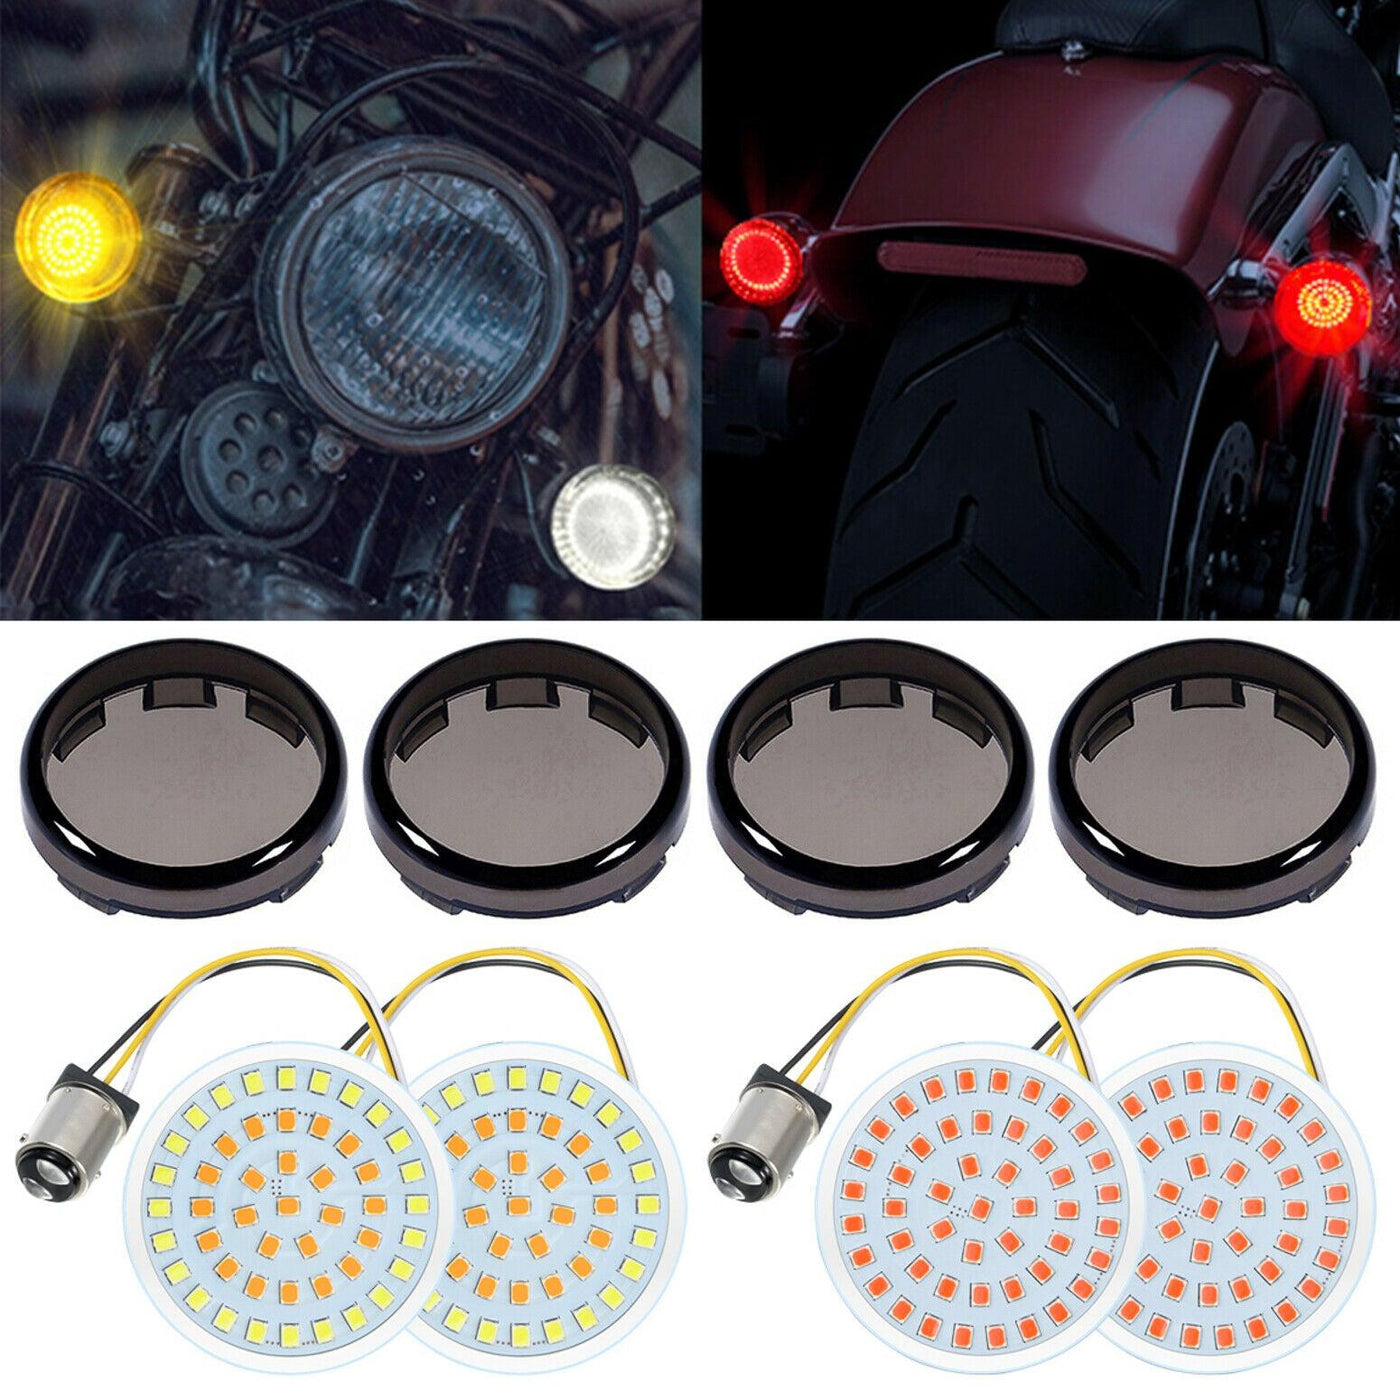 4pcs 1157 Bullet SMD Turn Signal Running Lights Smoke Lens Fit for Harley Dyna - Moto Life Products